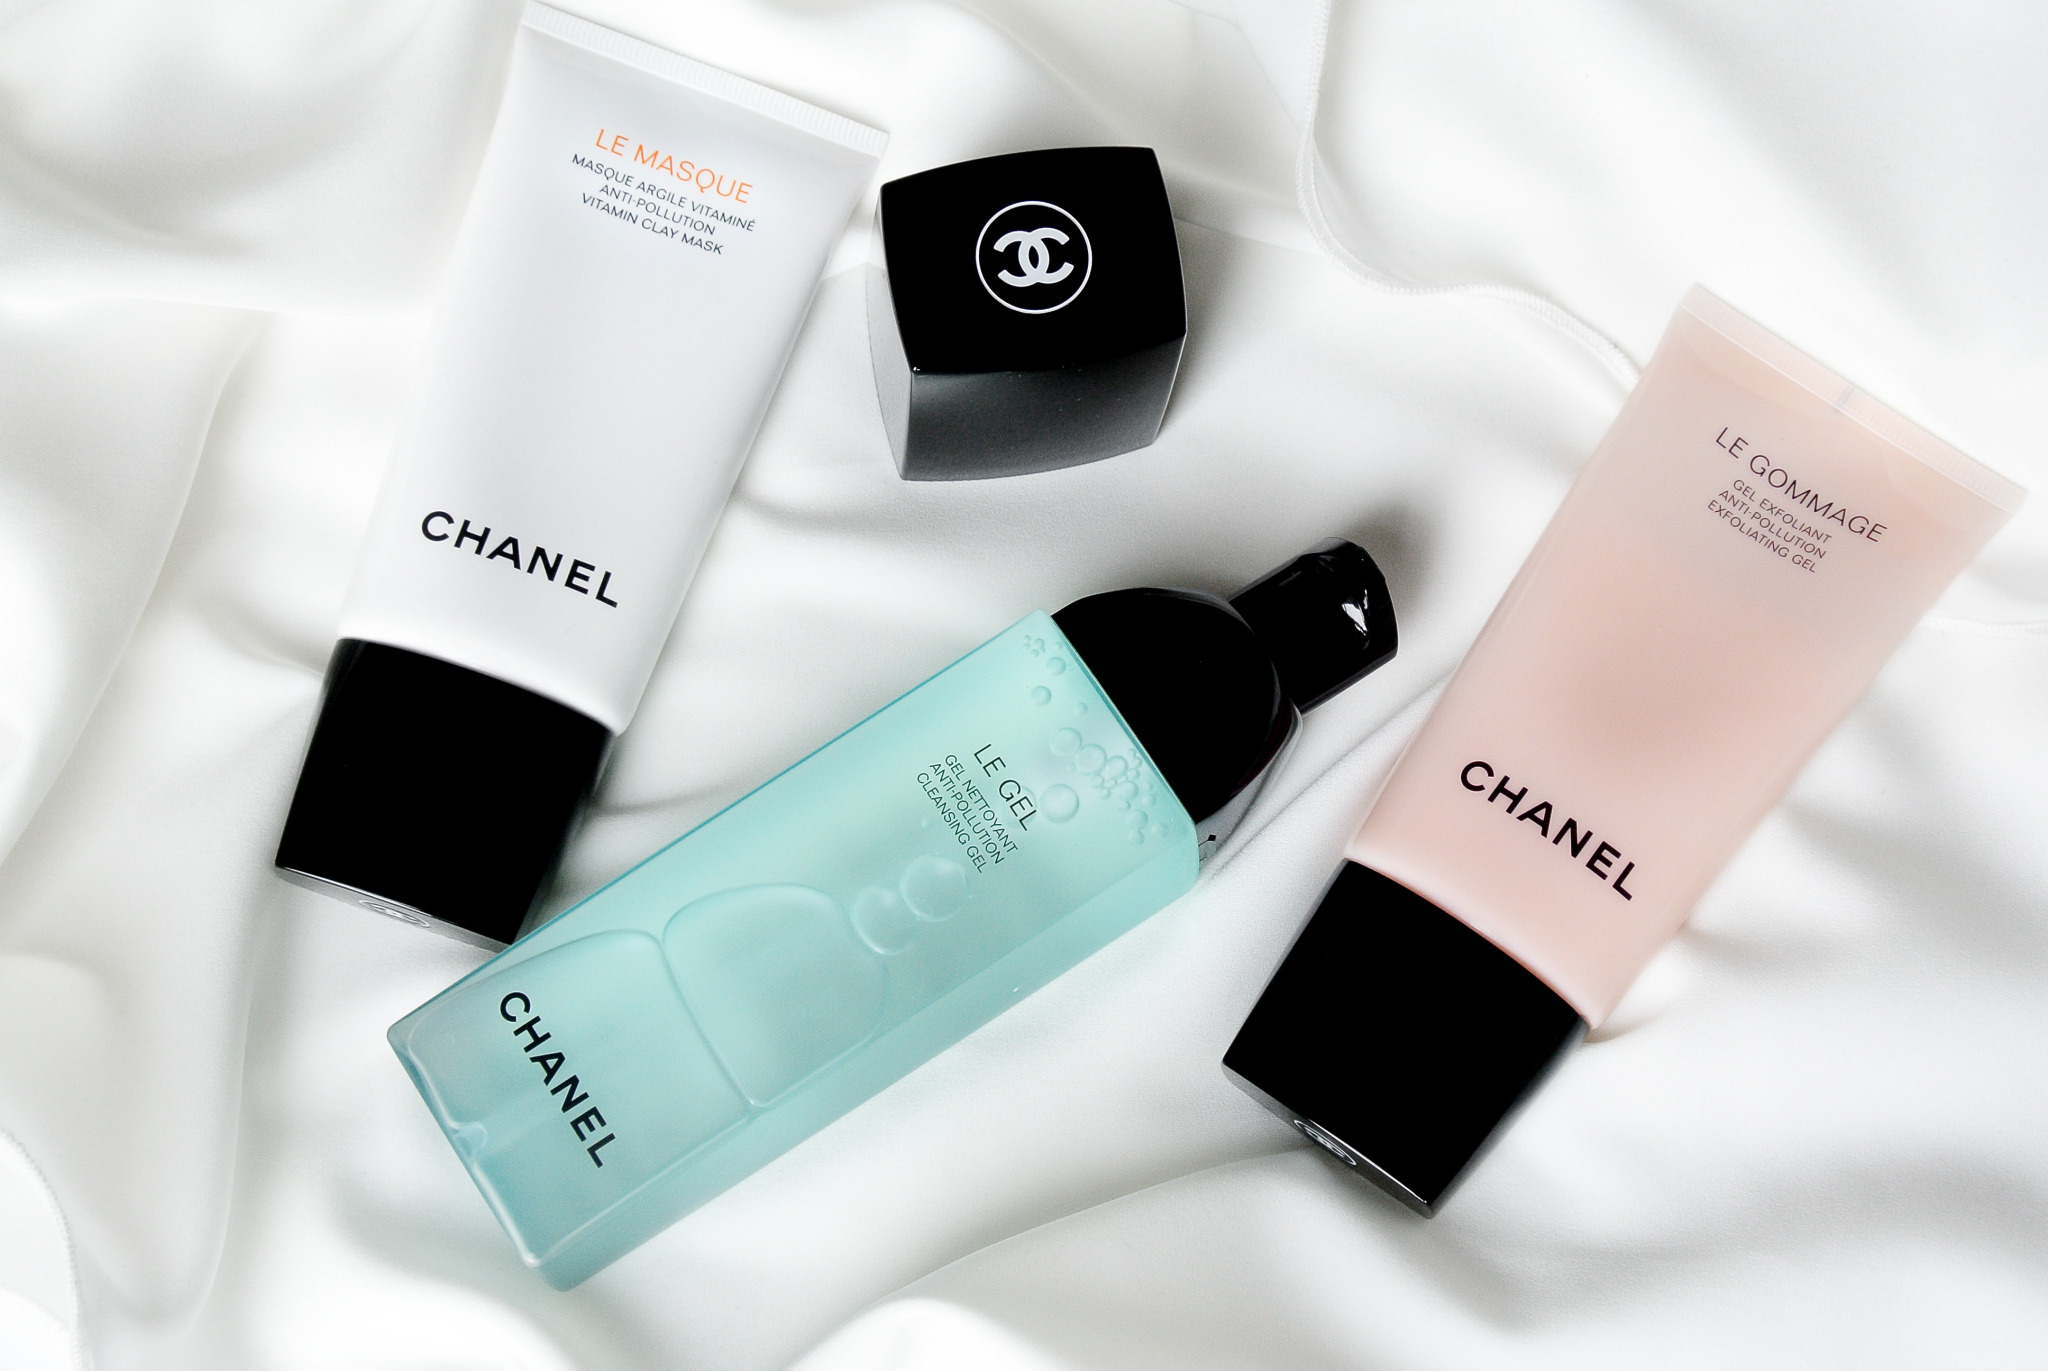 Chanel Le Gel Cleanser Review  The Luxe Minimalist